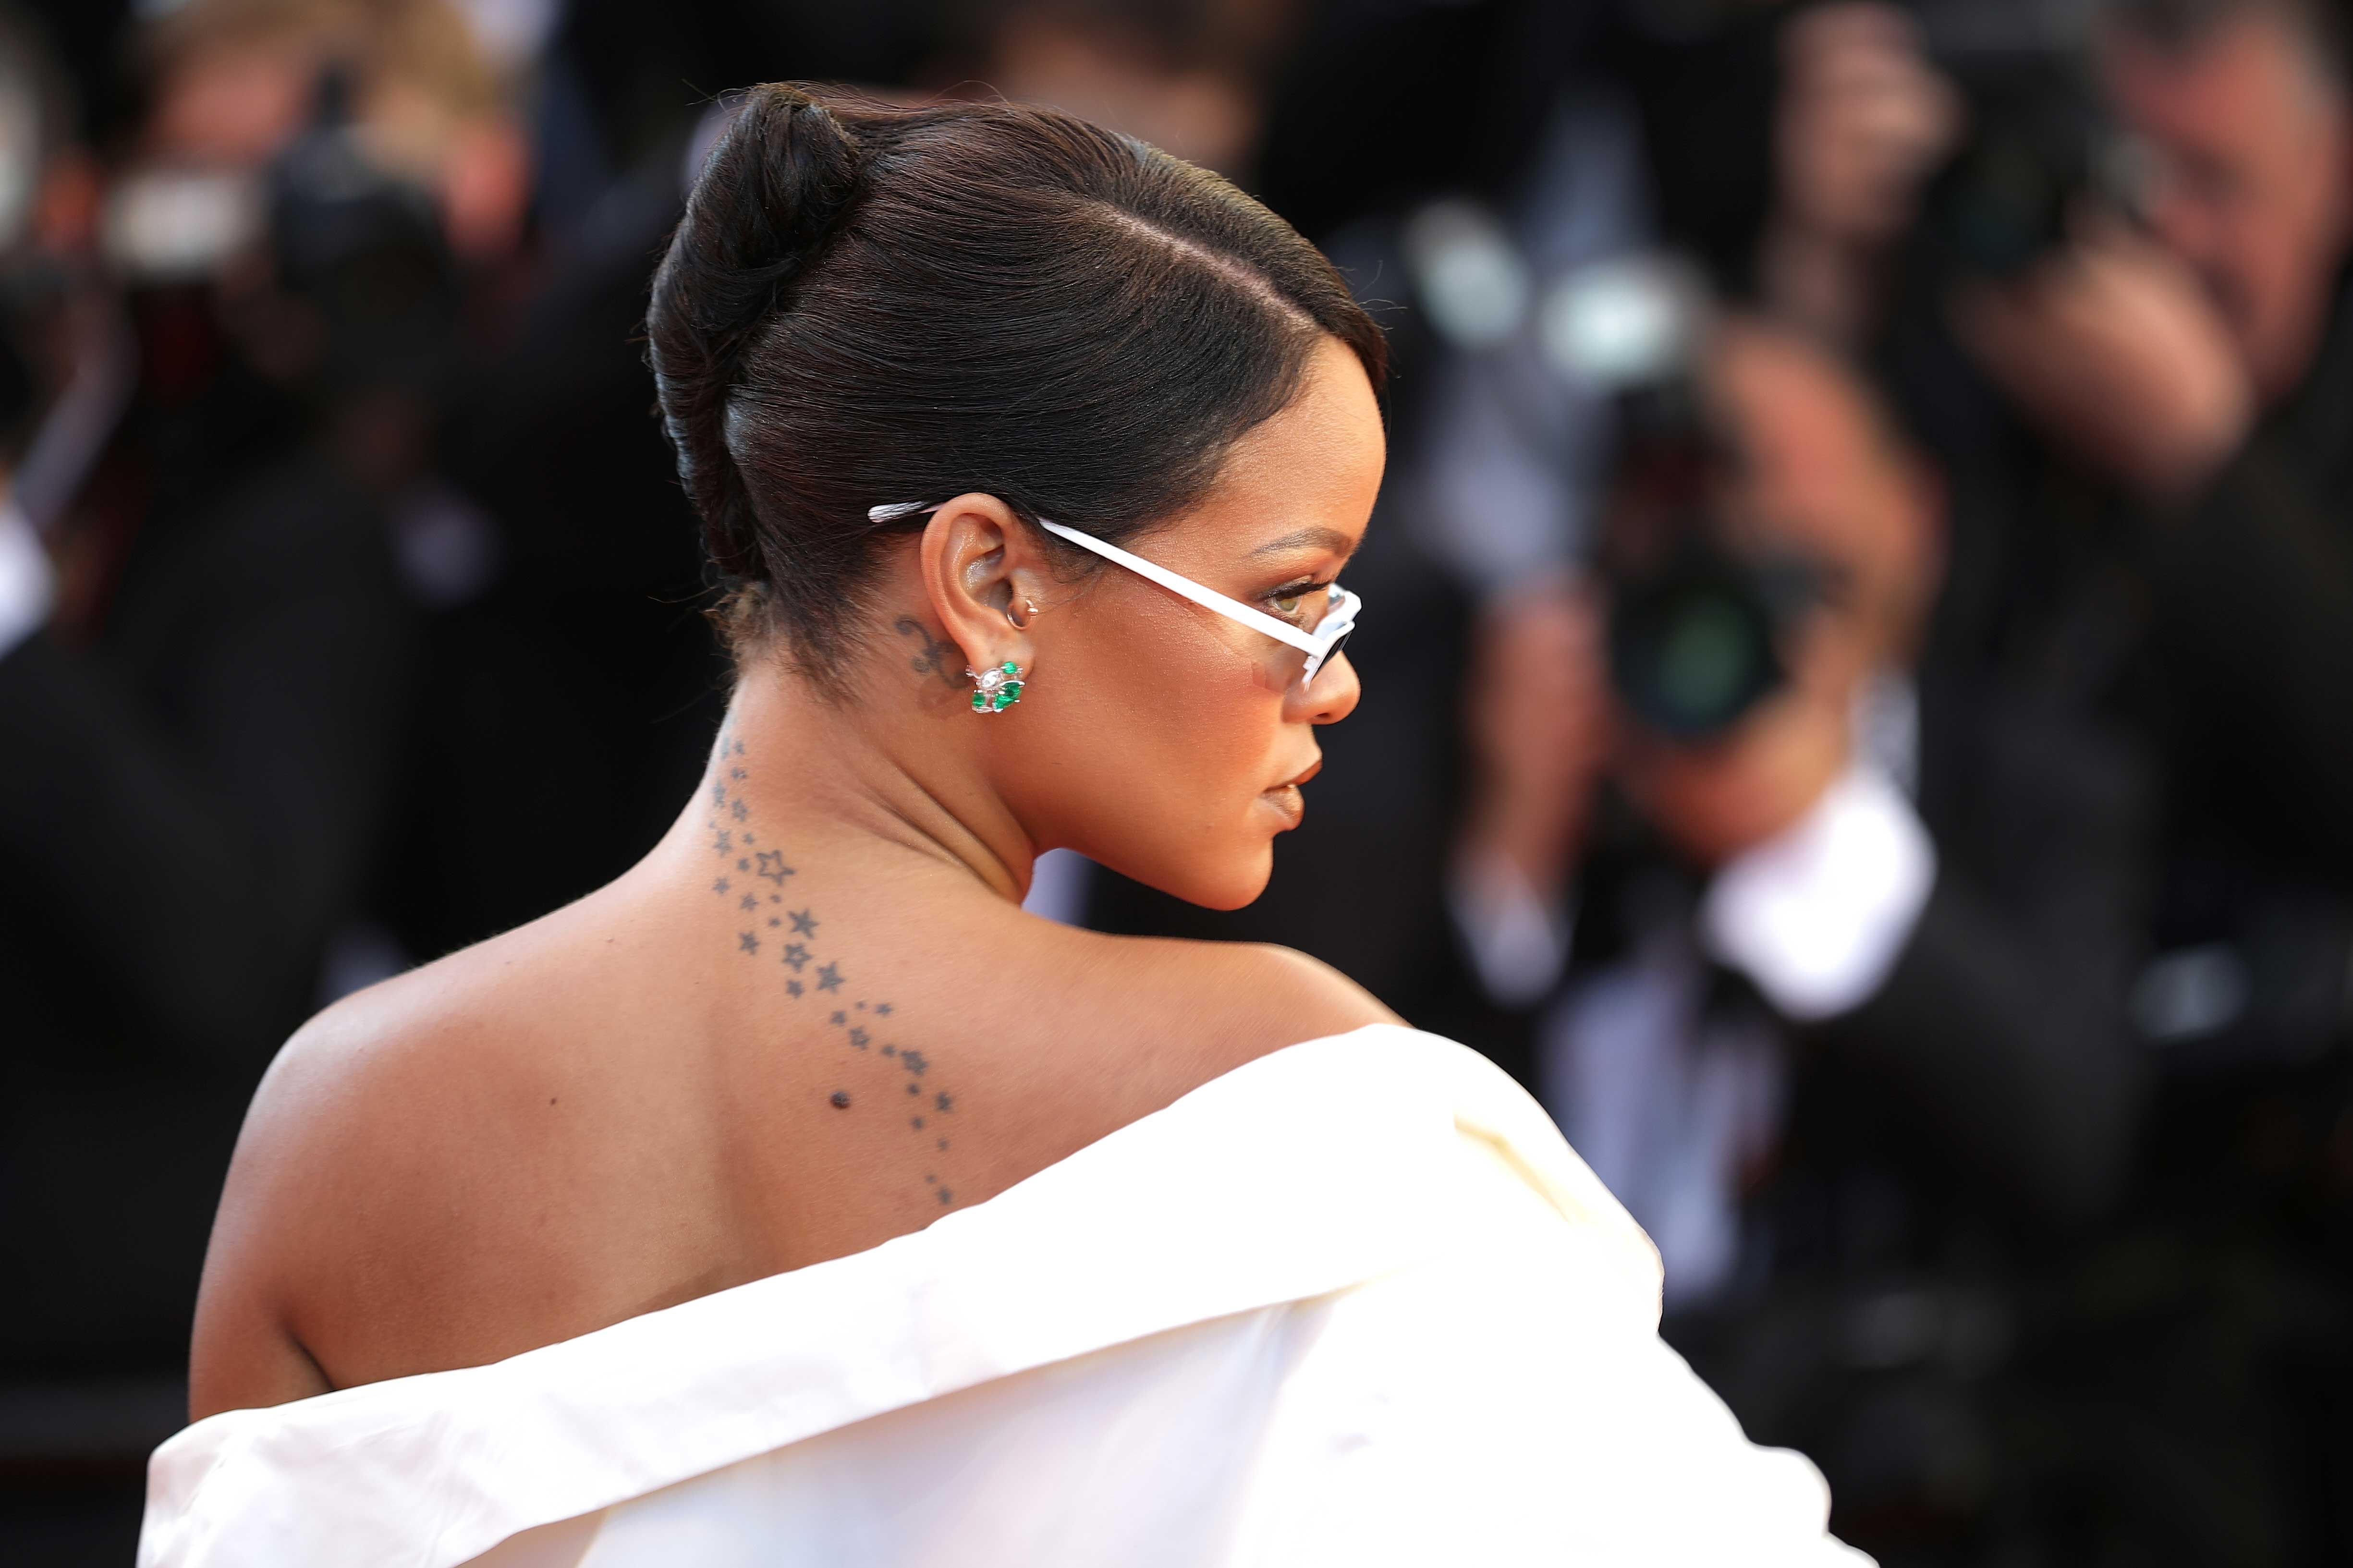 Rihanna Wows in Her Fenty Line at Fashion Awards 2019!